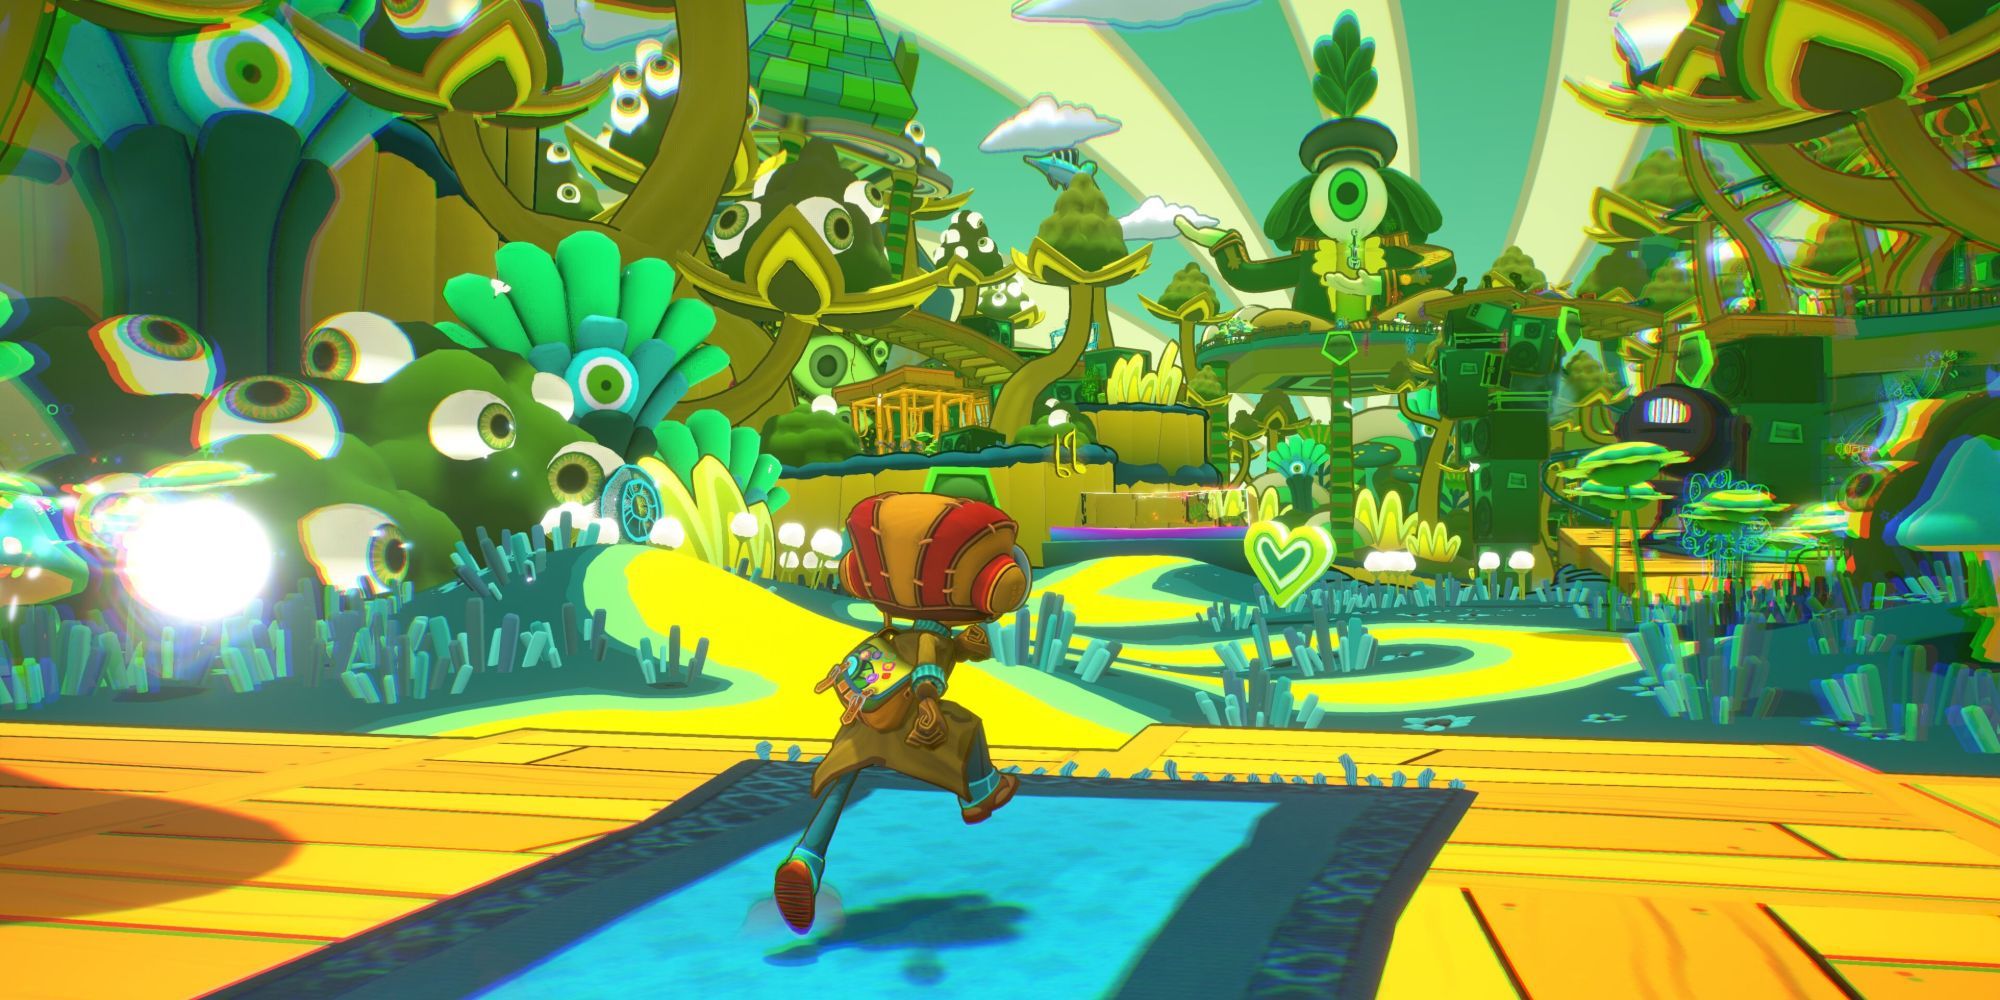 Raz making his way through a colorful looking area in Psychonauts 2